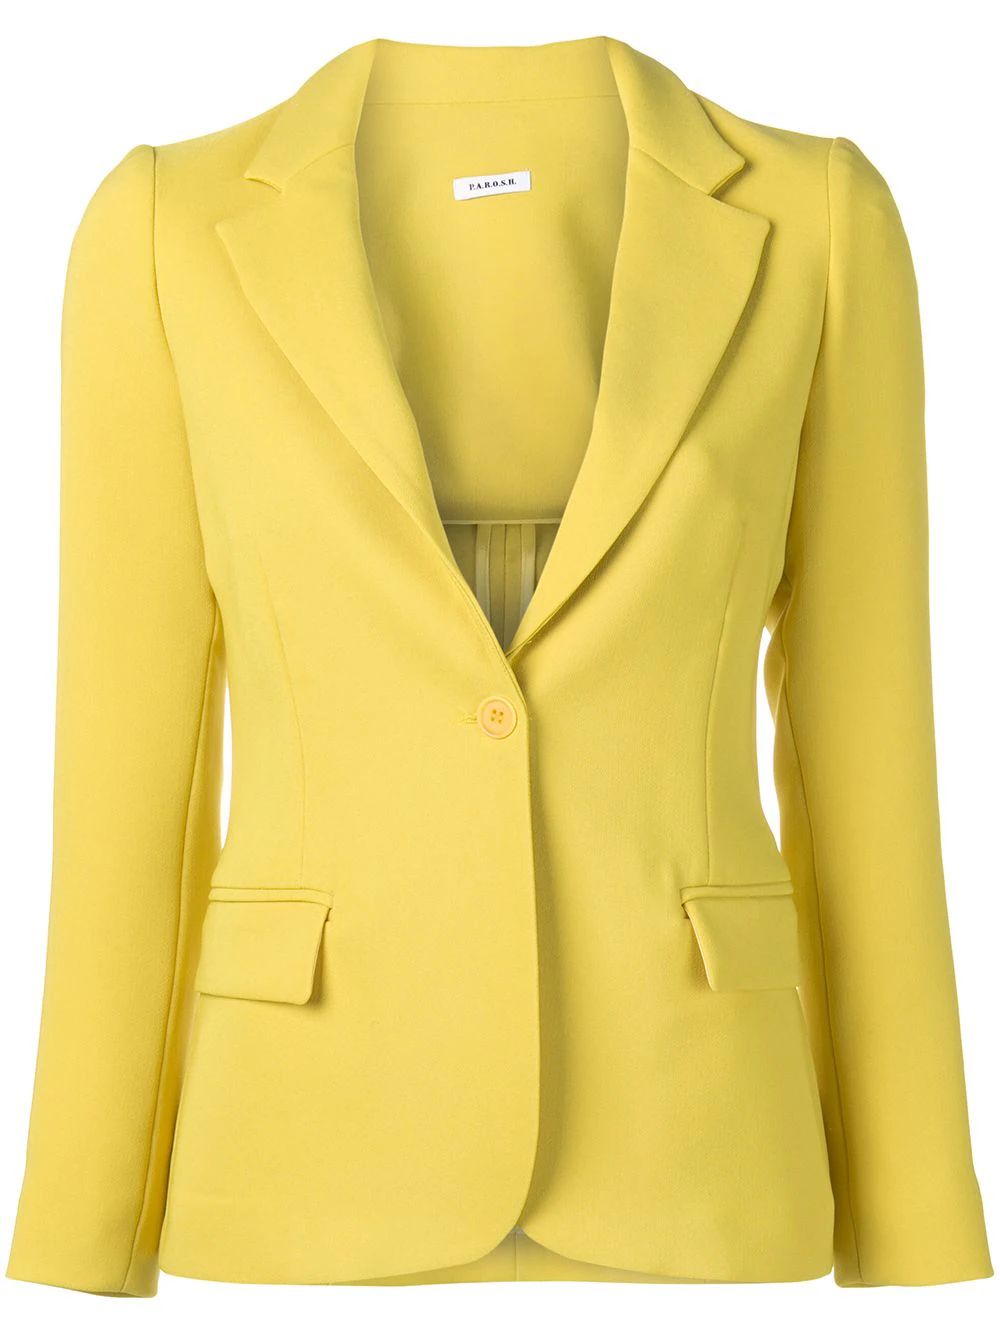 P.A.R.O.S.H. Poloxy fitted blazer - Yellow | FarFetch Global